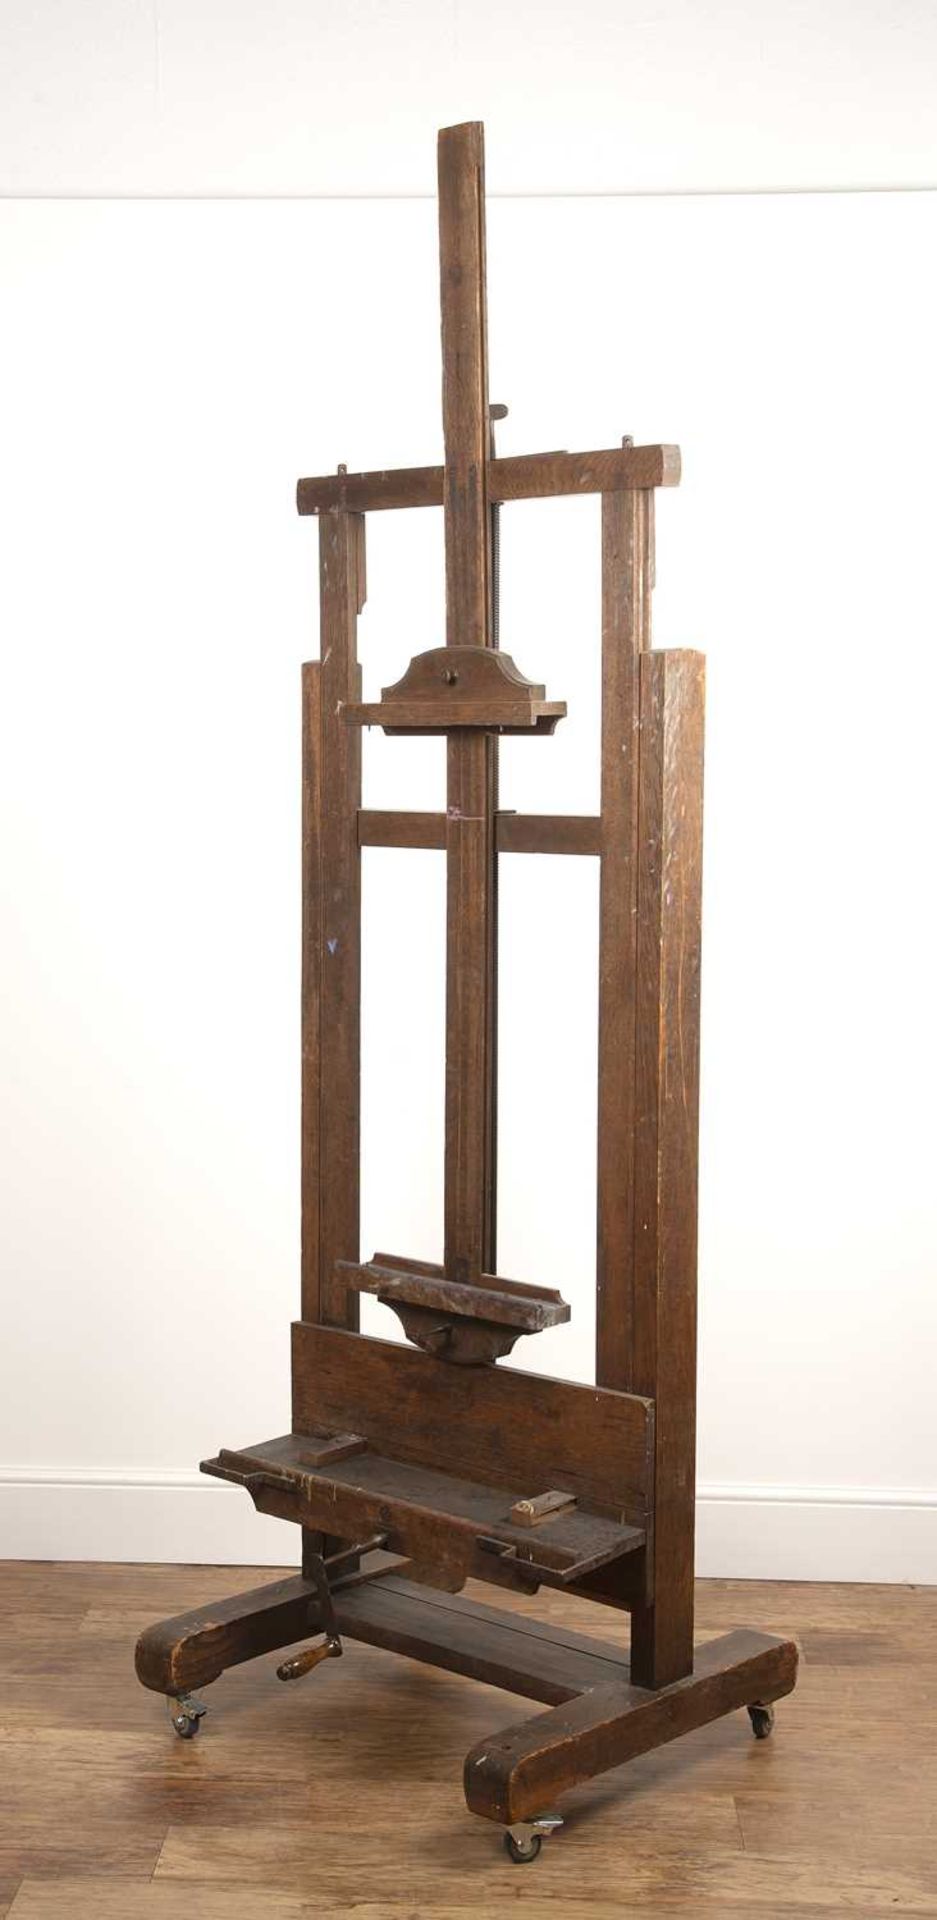 Robertson & Co. Ltd, London artist's Gallery easel 19th Century, with adjustable mechanism, brass - Image 3 of 4